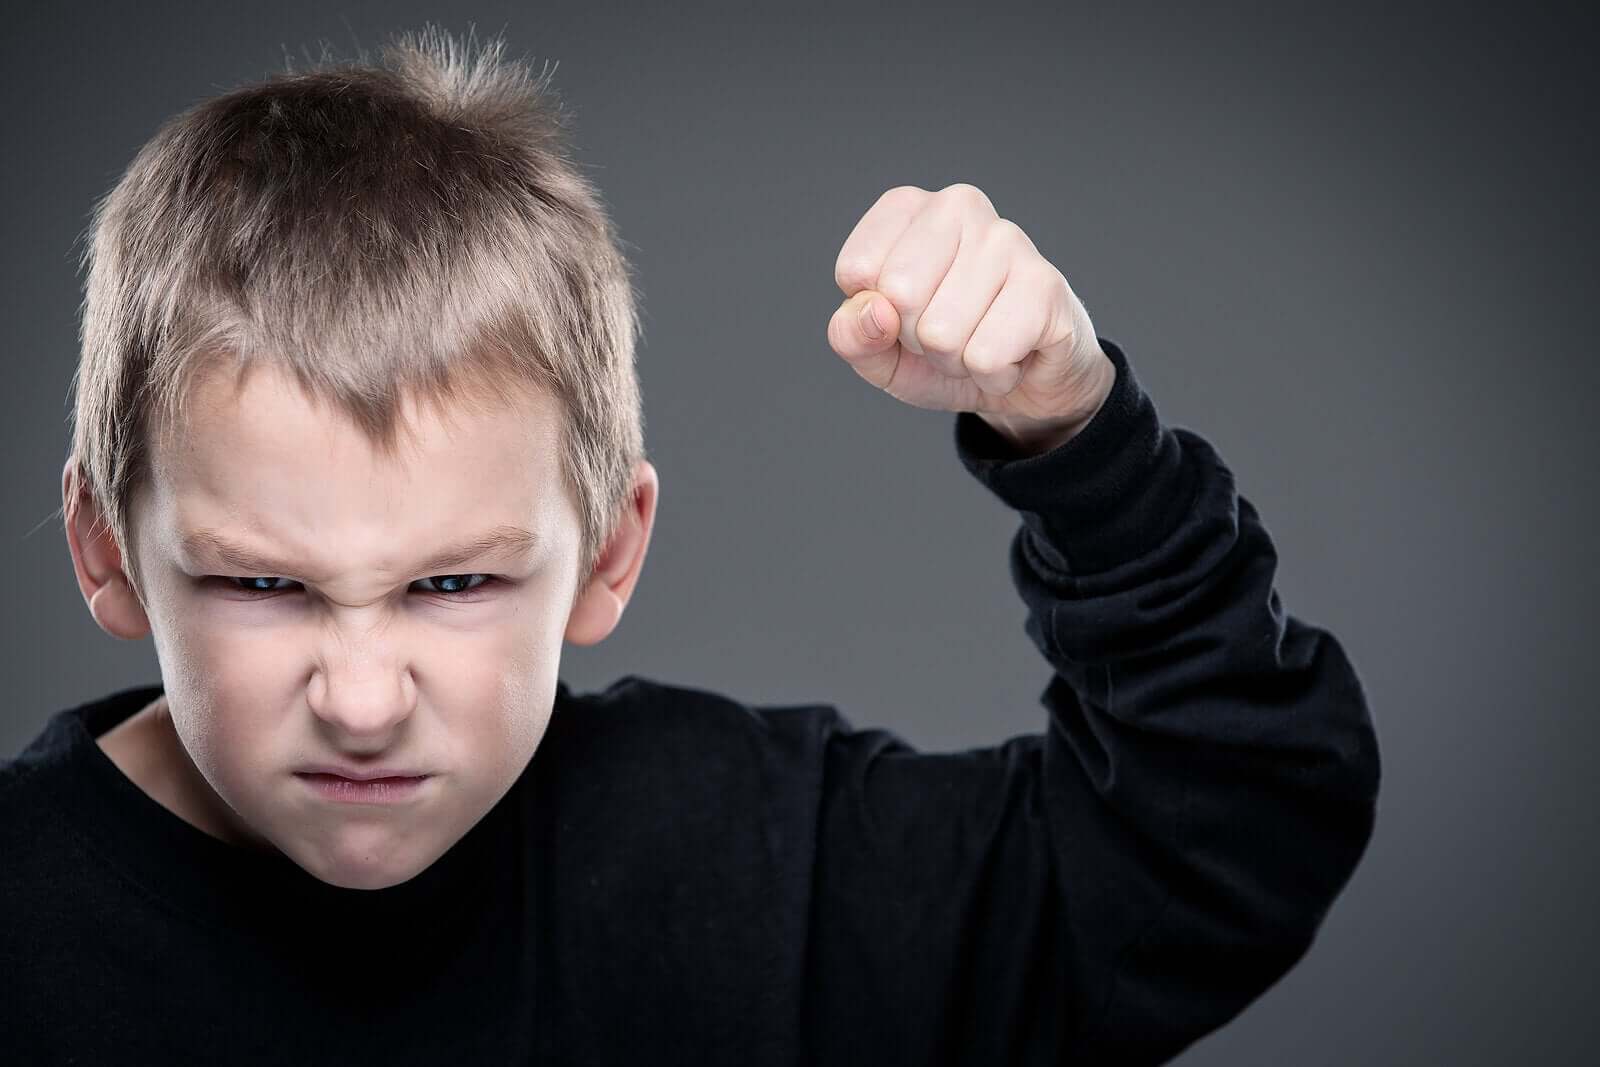 A child holding up his fist angrily.